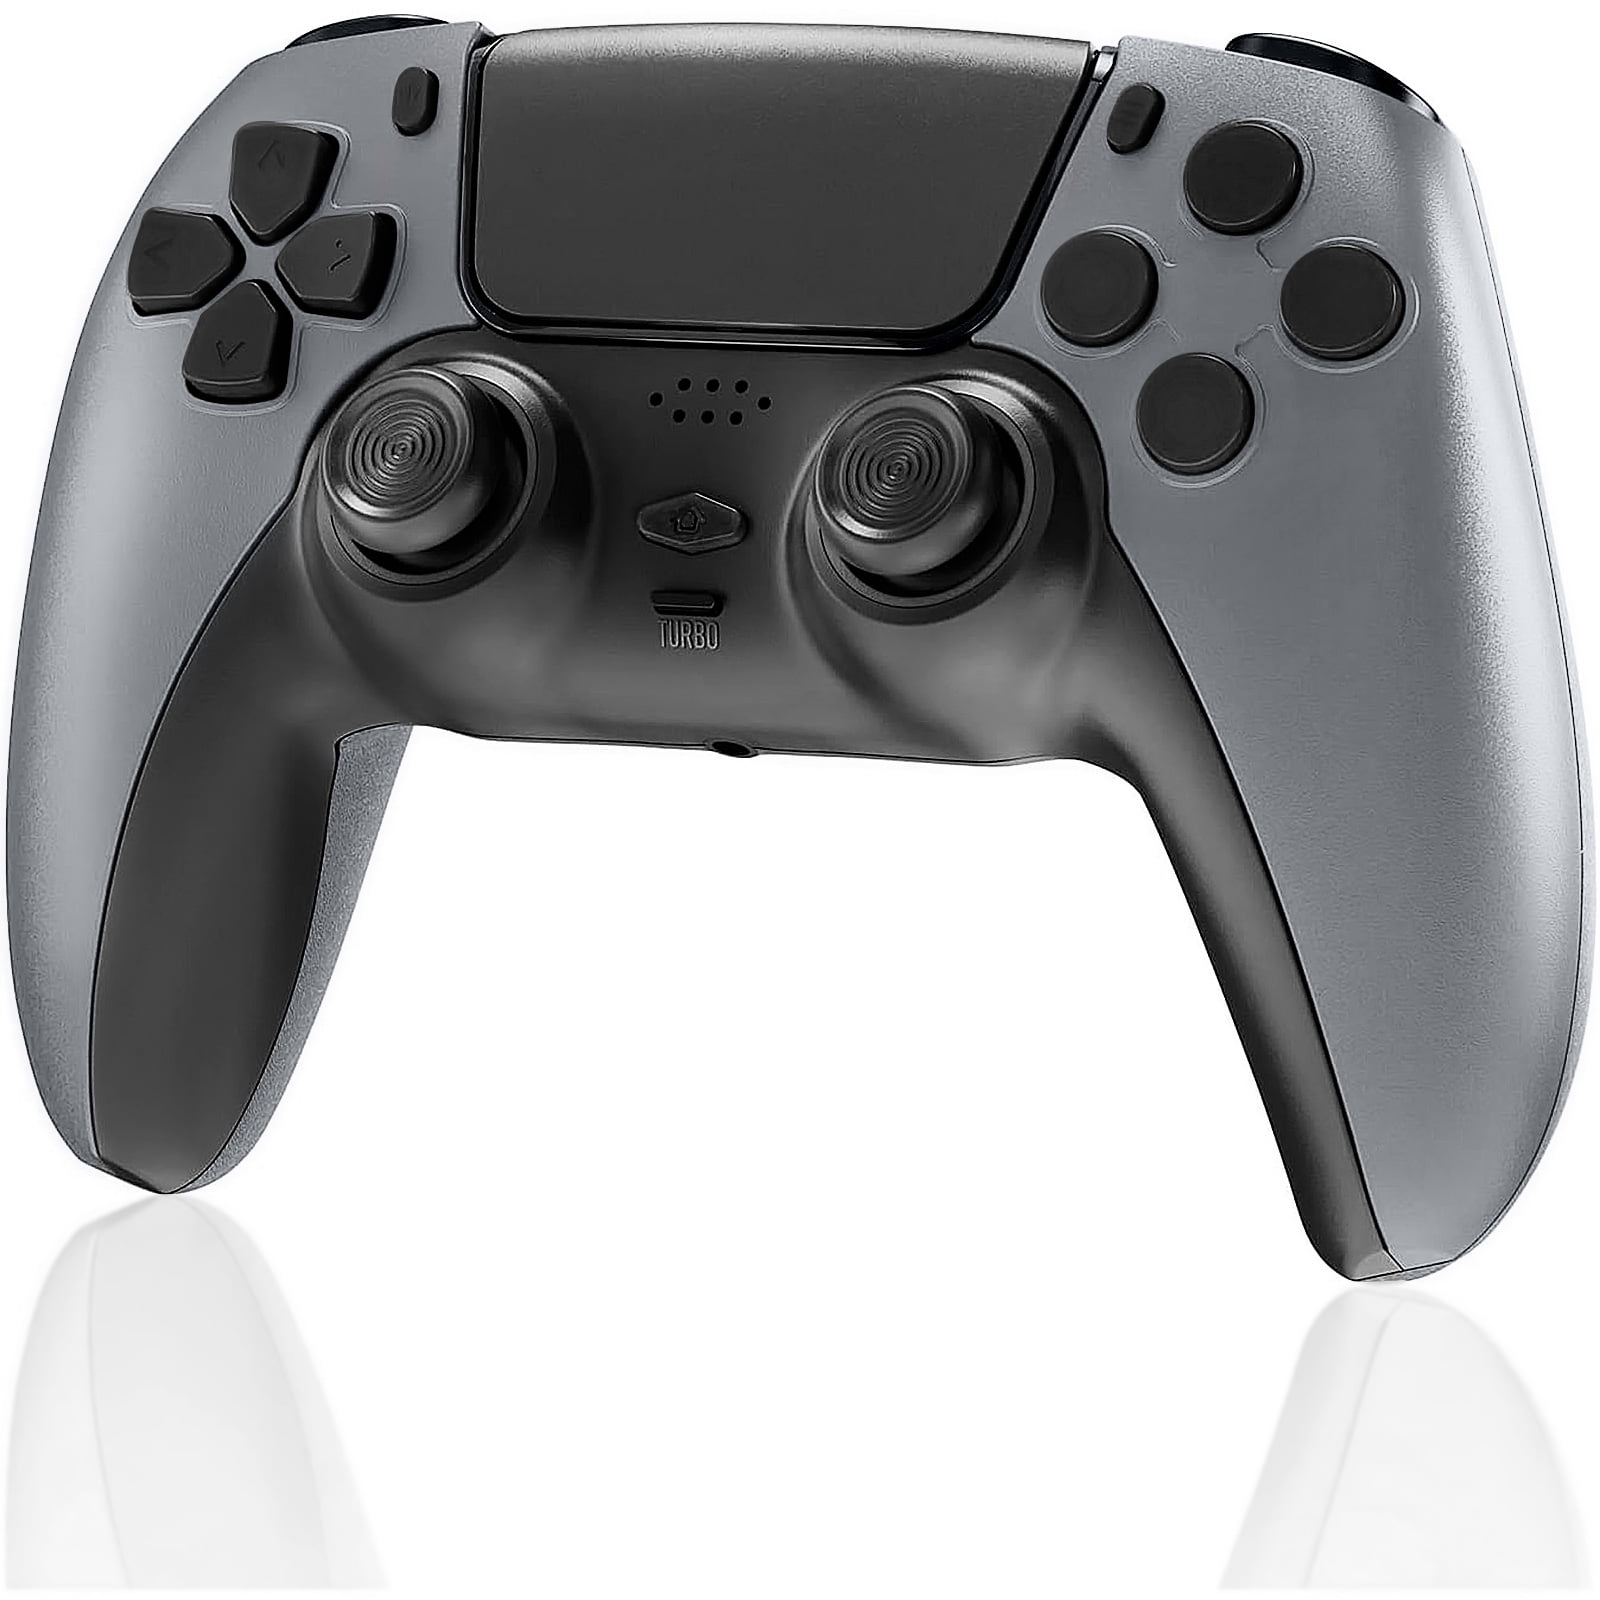 SPBPQY Wireless Game Controller Compatible with PS4/PS4 Pro/PS4 Slim -  Steel Grey